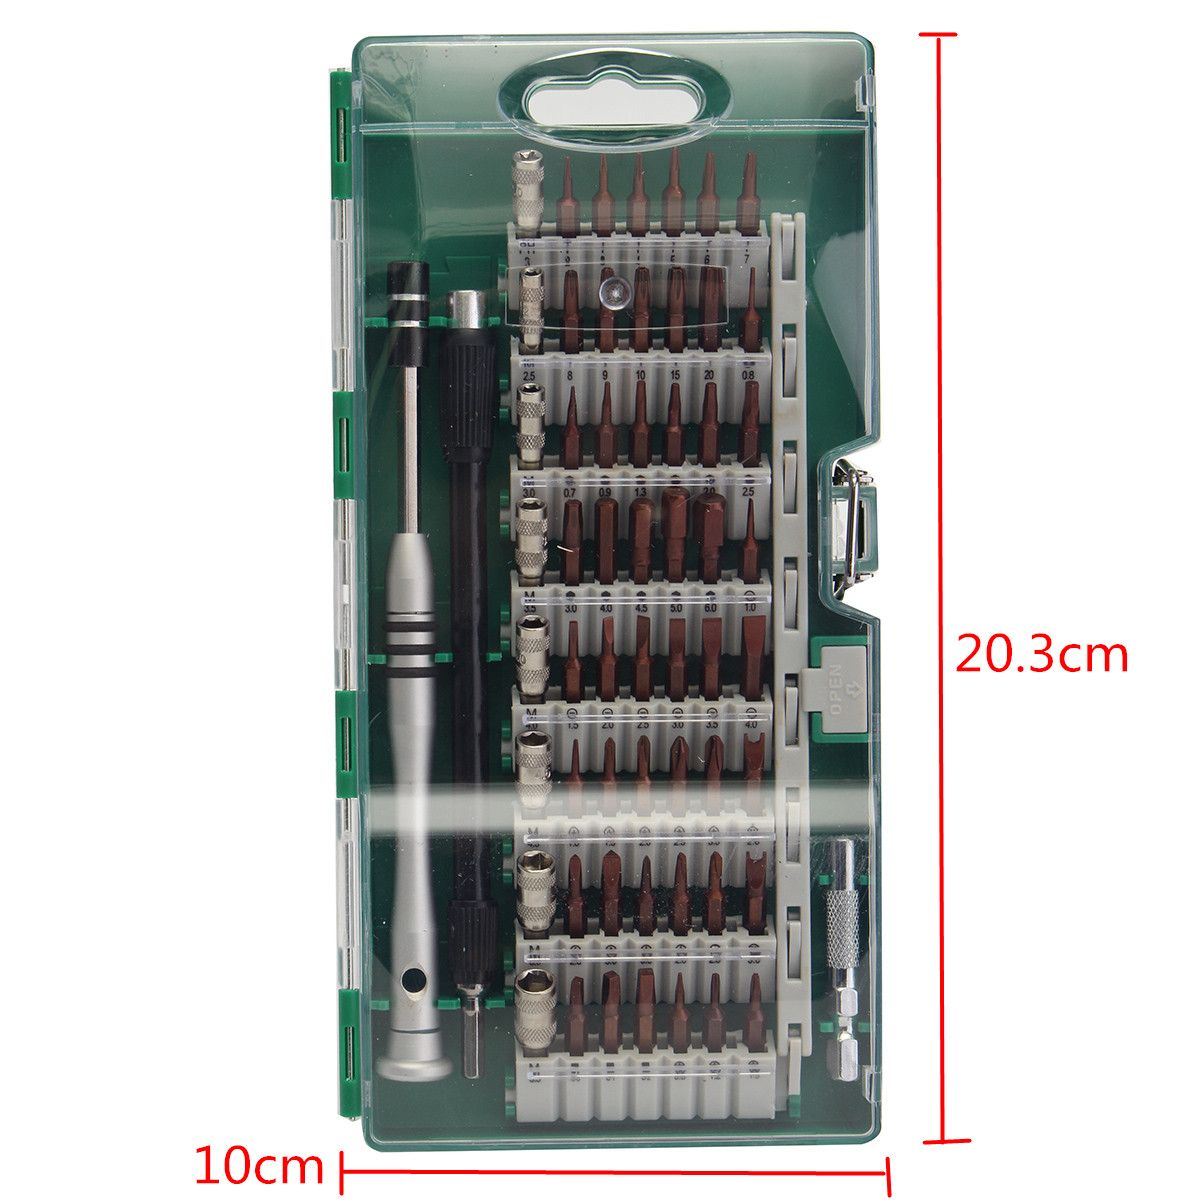 60-in-1-Precision-Screwdriver-Bit-Repairtoolkit-For-Cell-Phone-Tablet-Laptop-1150836